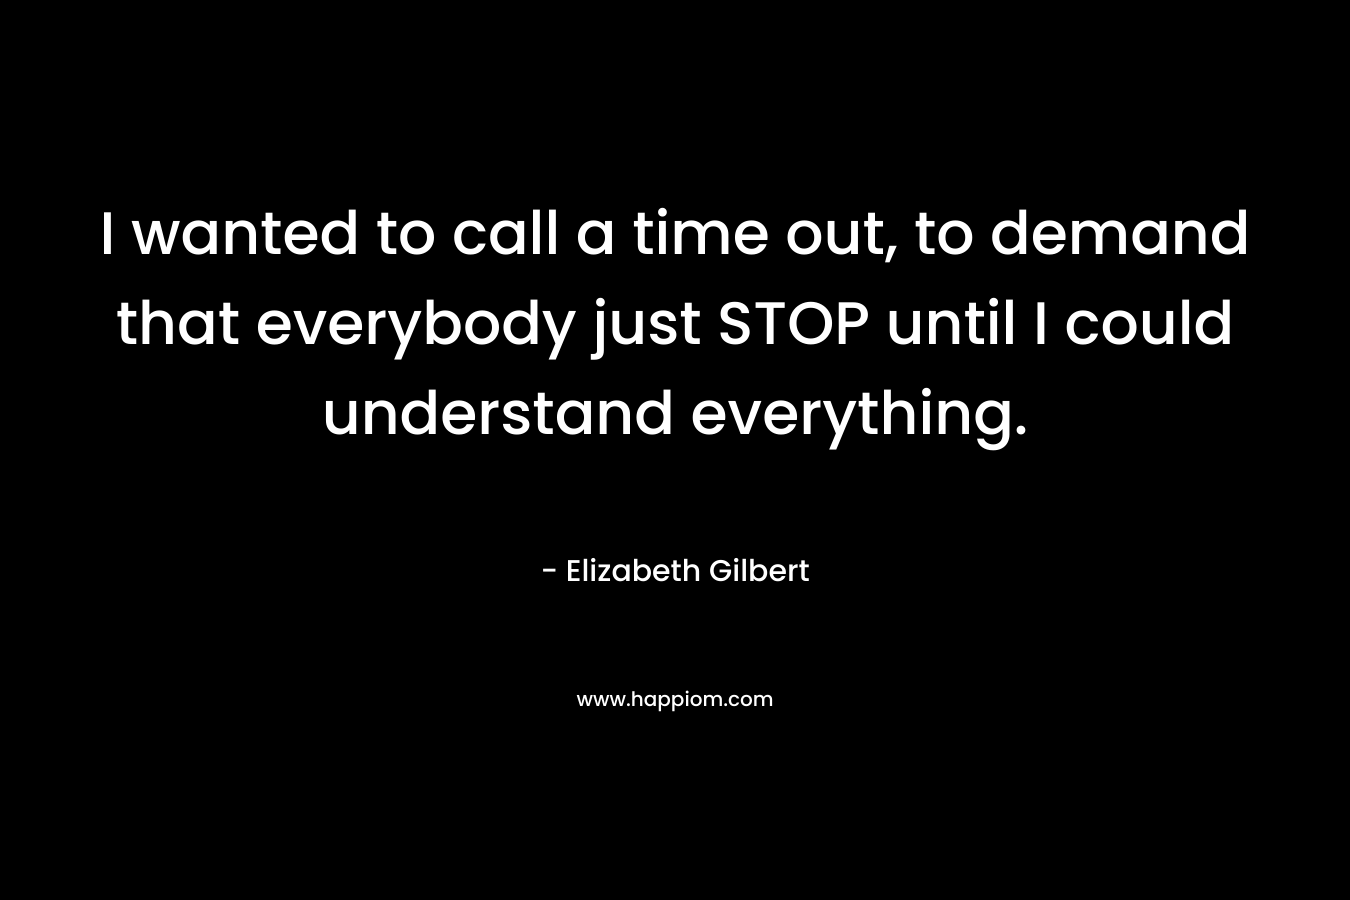 I wanted to call a time out, to demand that everybody just STOP until I could understand everything.